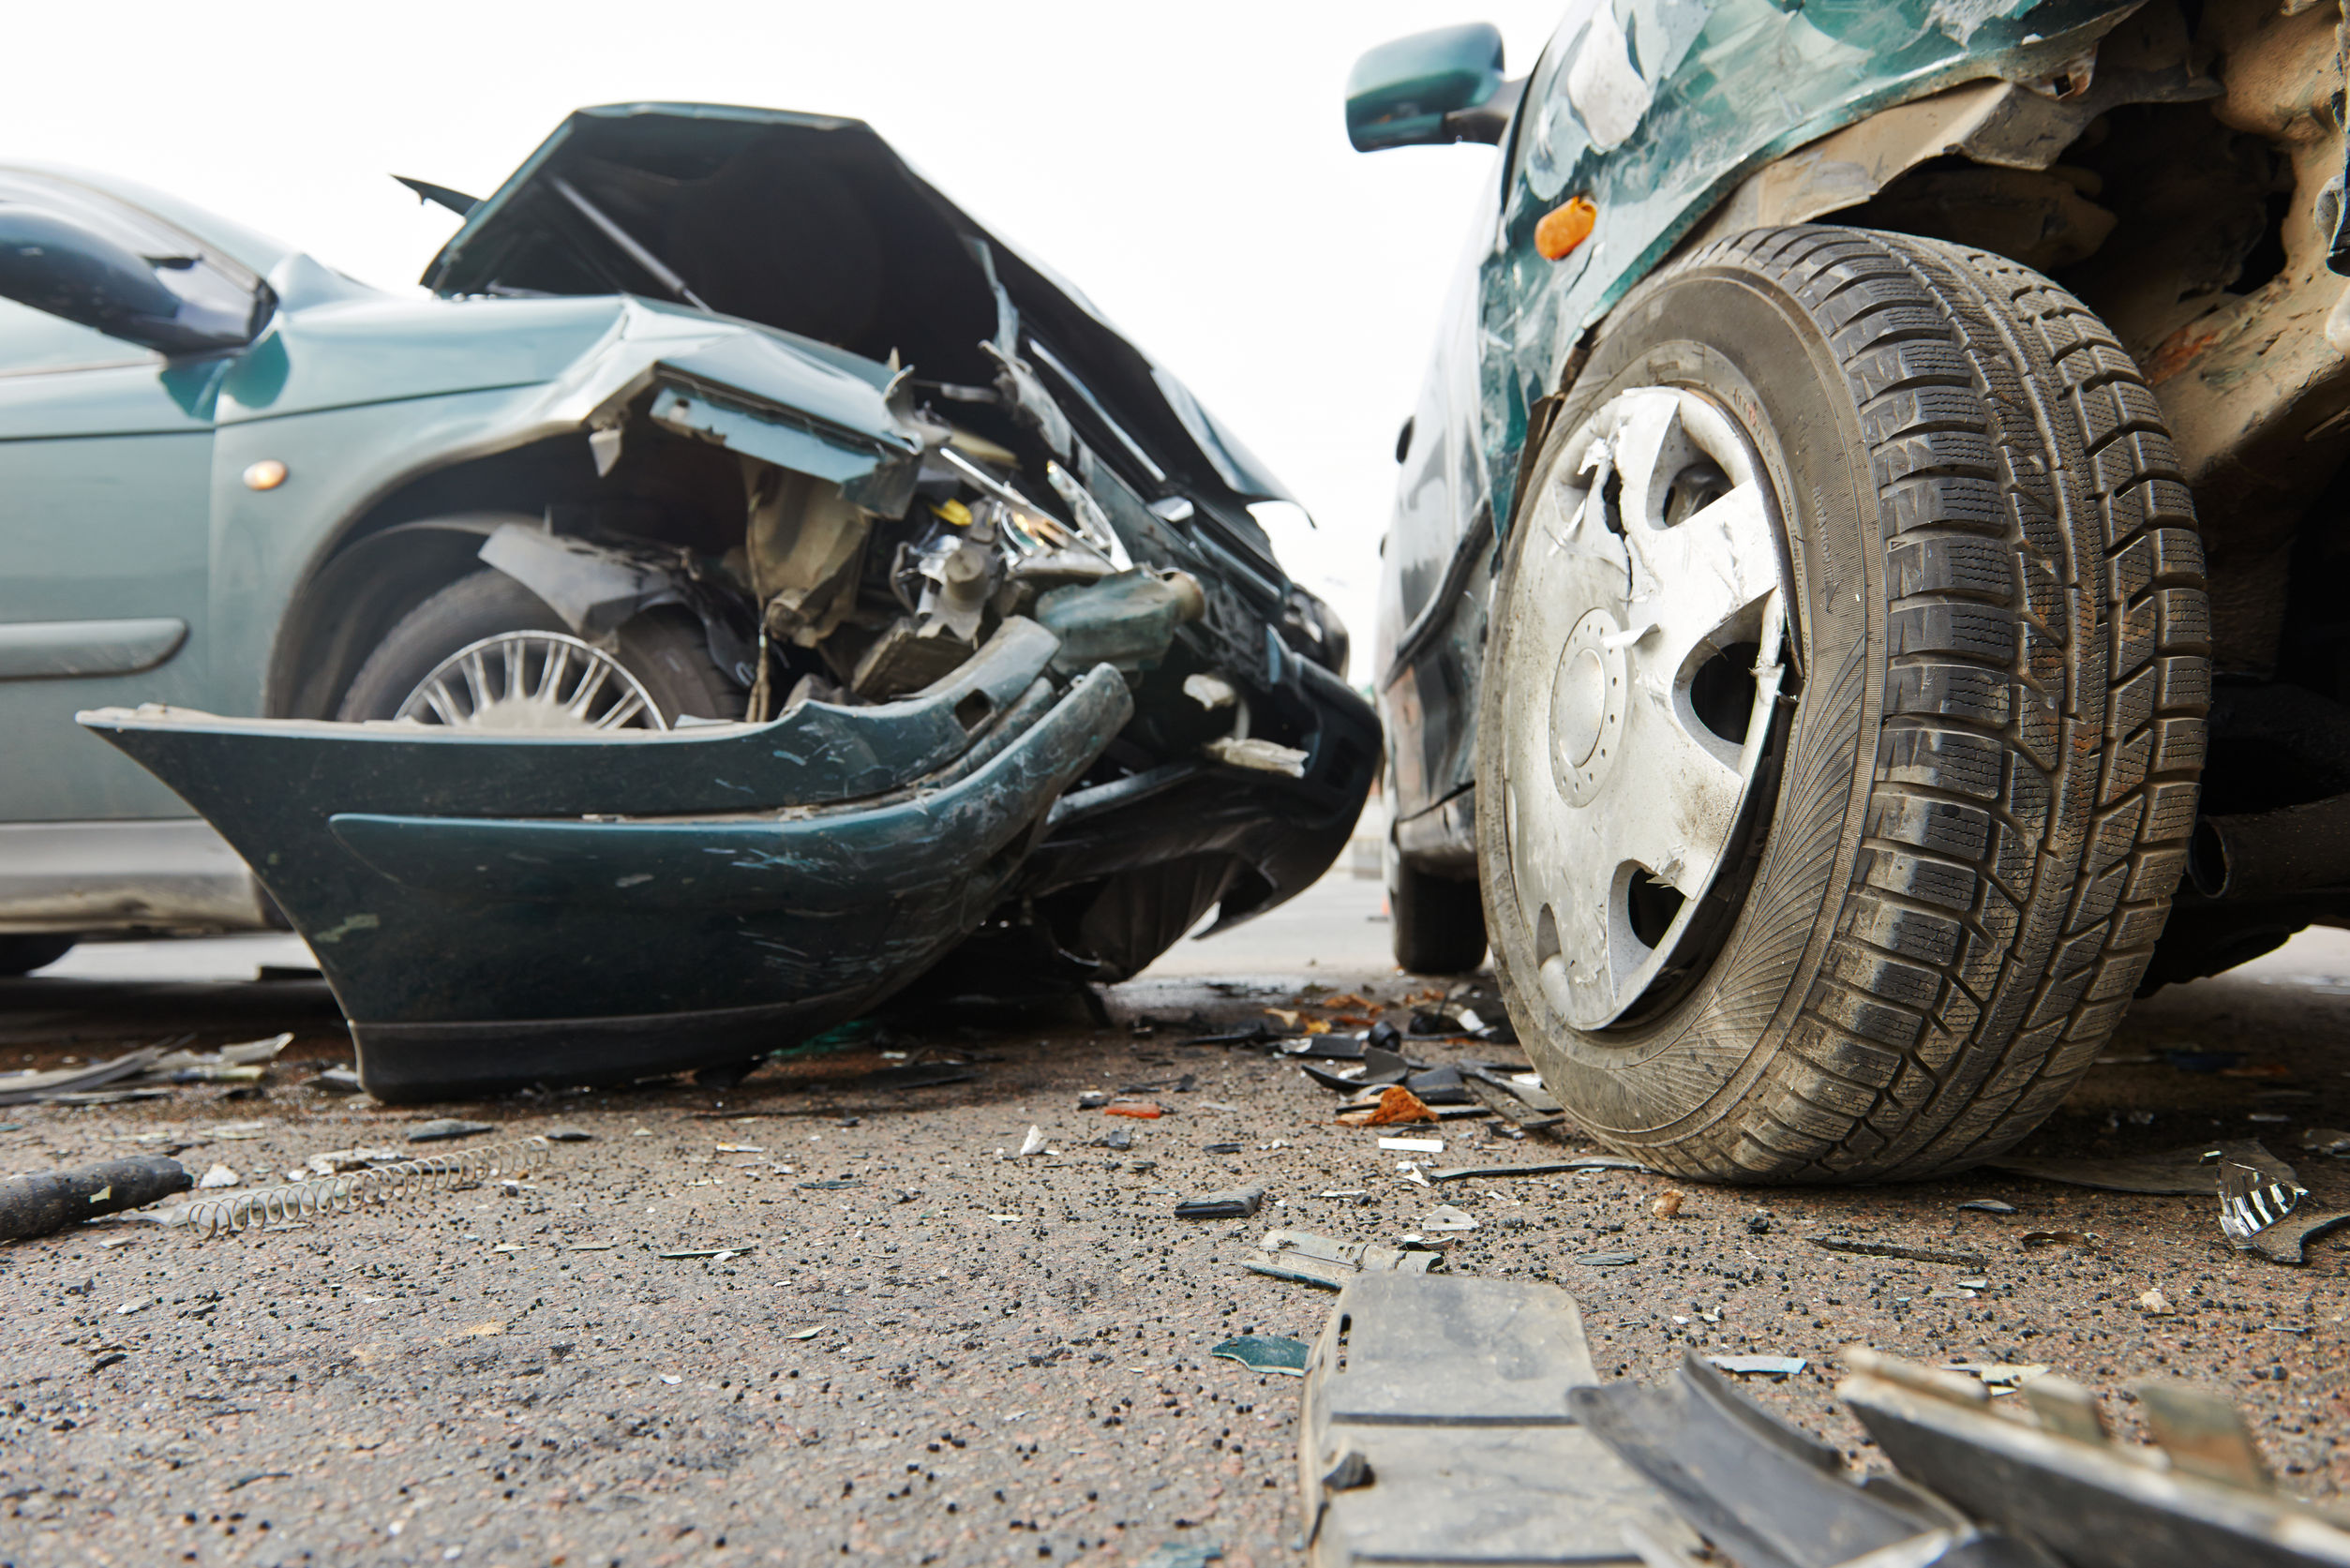 Tampa Crash Kills 3 – What Caused It? 1 Auto Accidents Injury Law Firm of South Florida